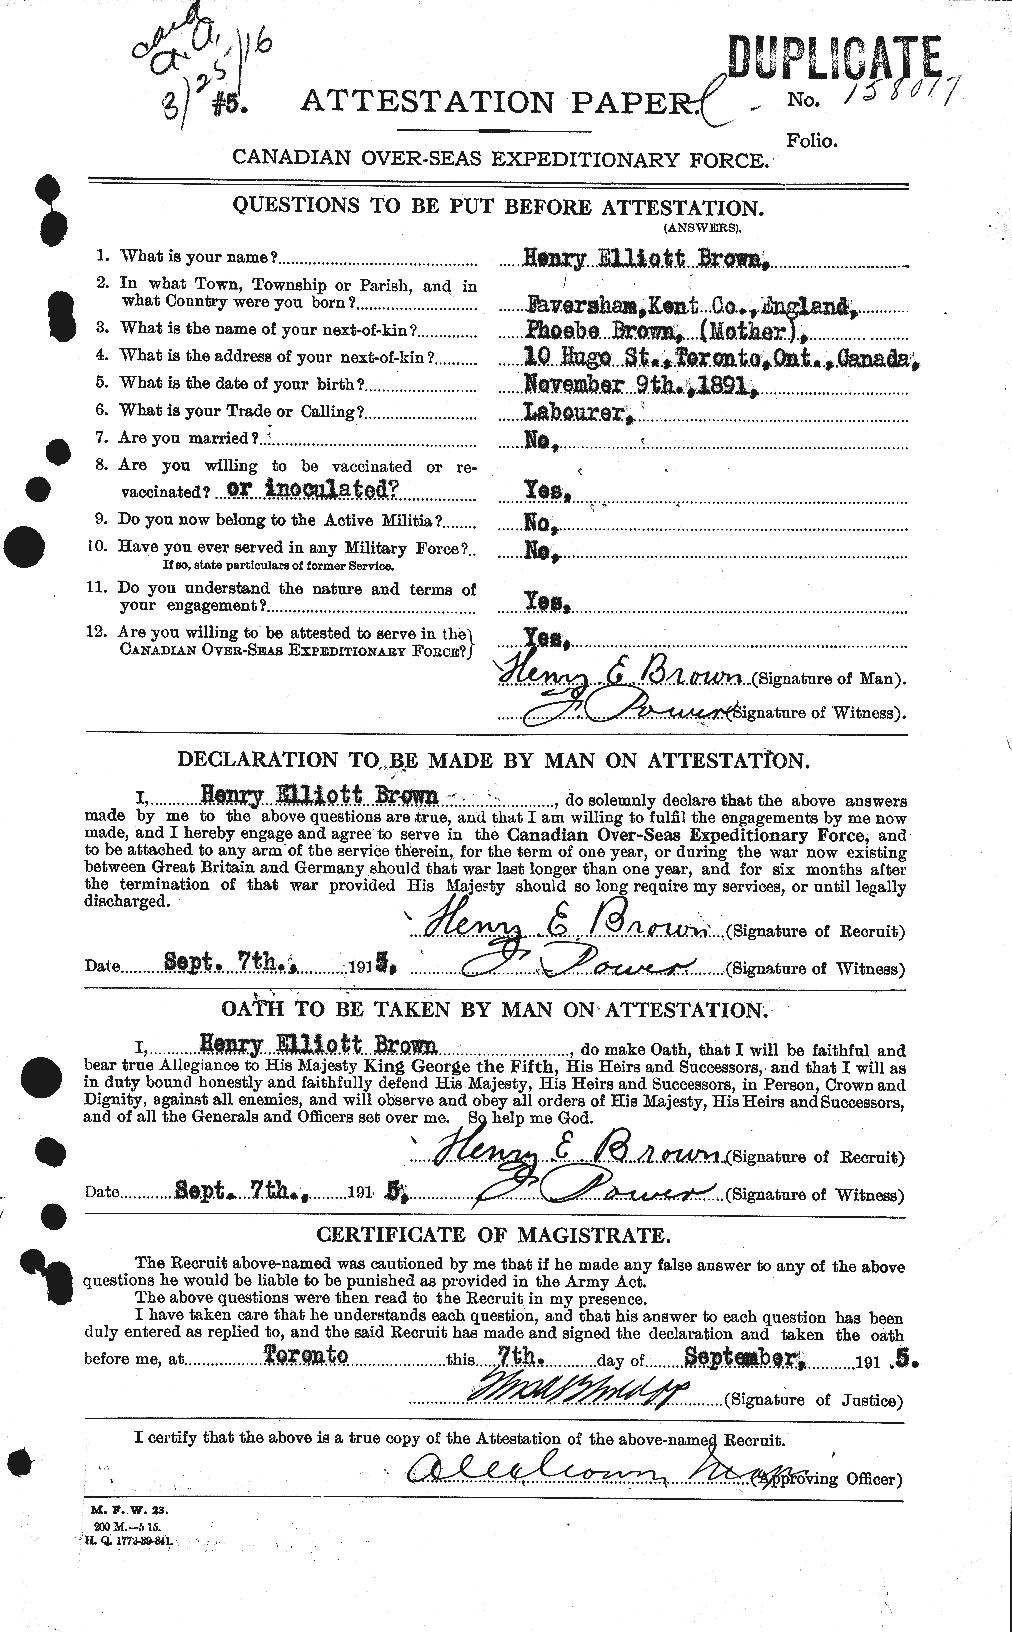 Personnel Records of the First World War - CEF 265527a